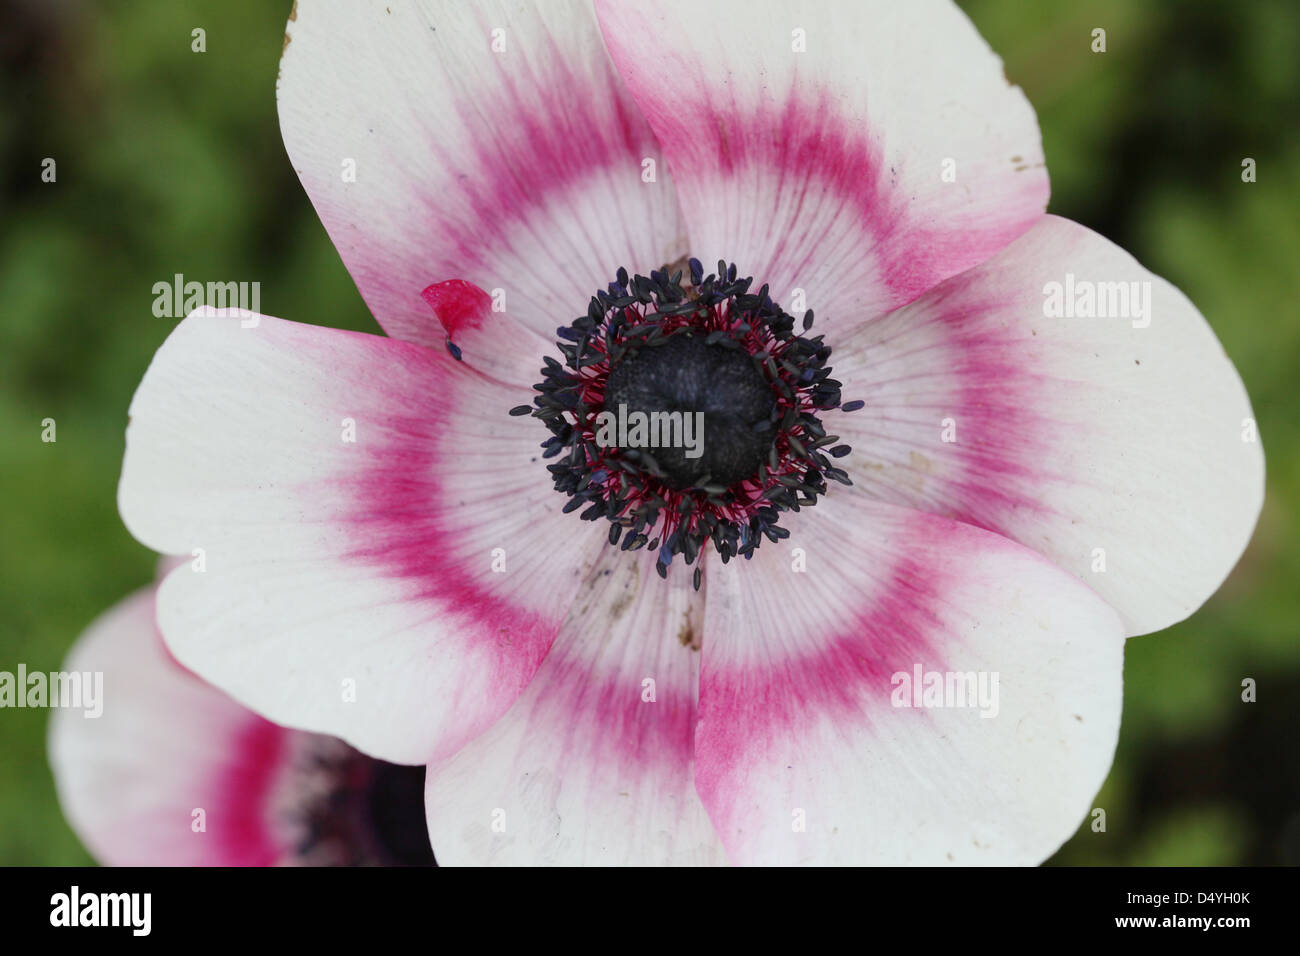 anemone flower close up detail Stock Photo